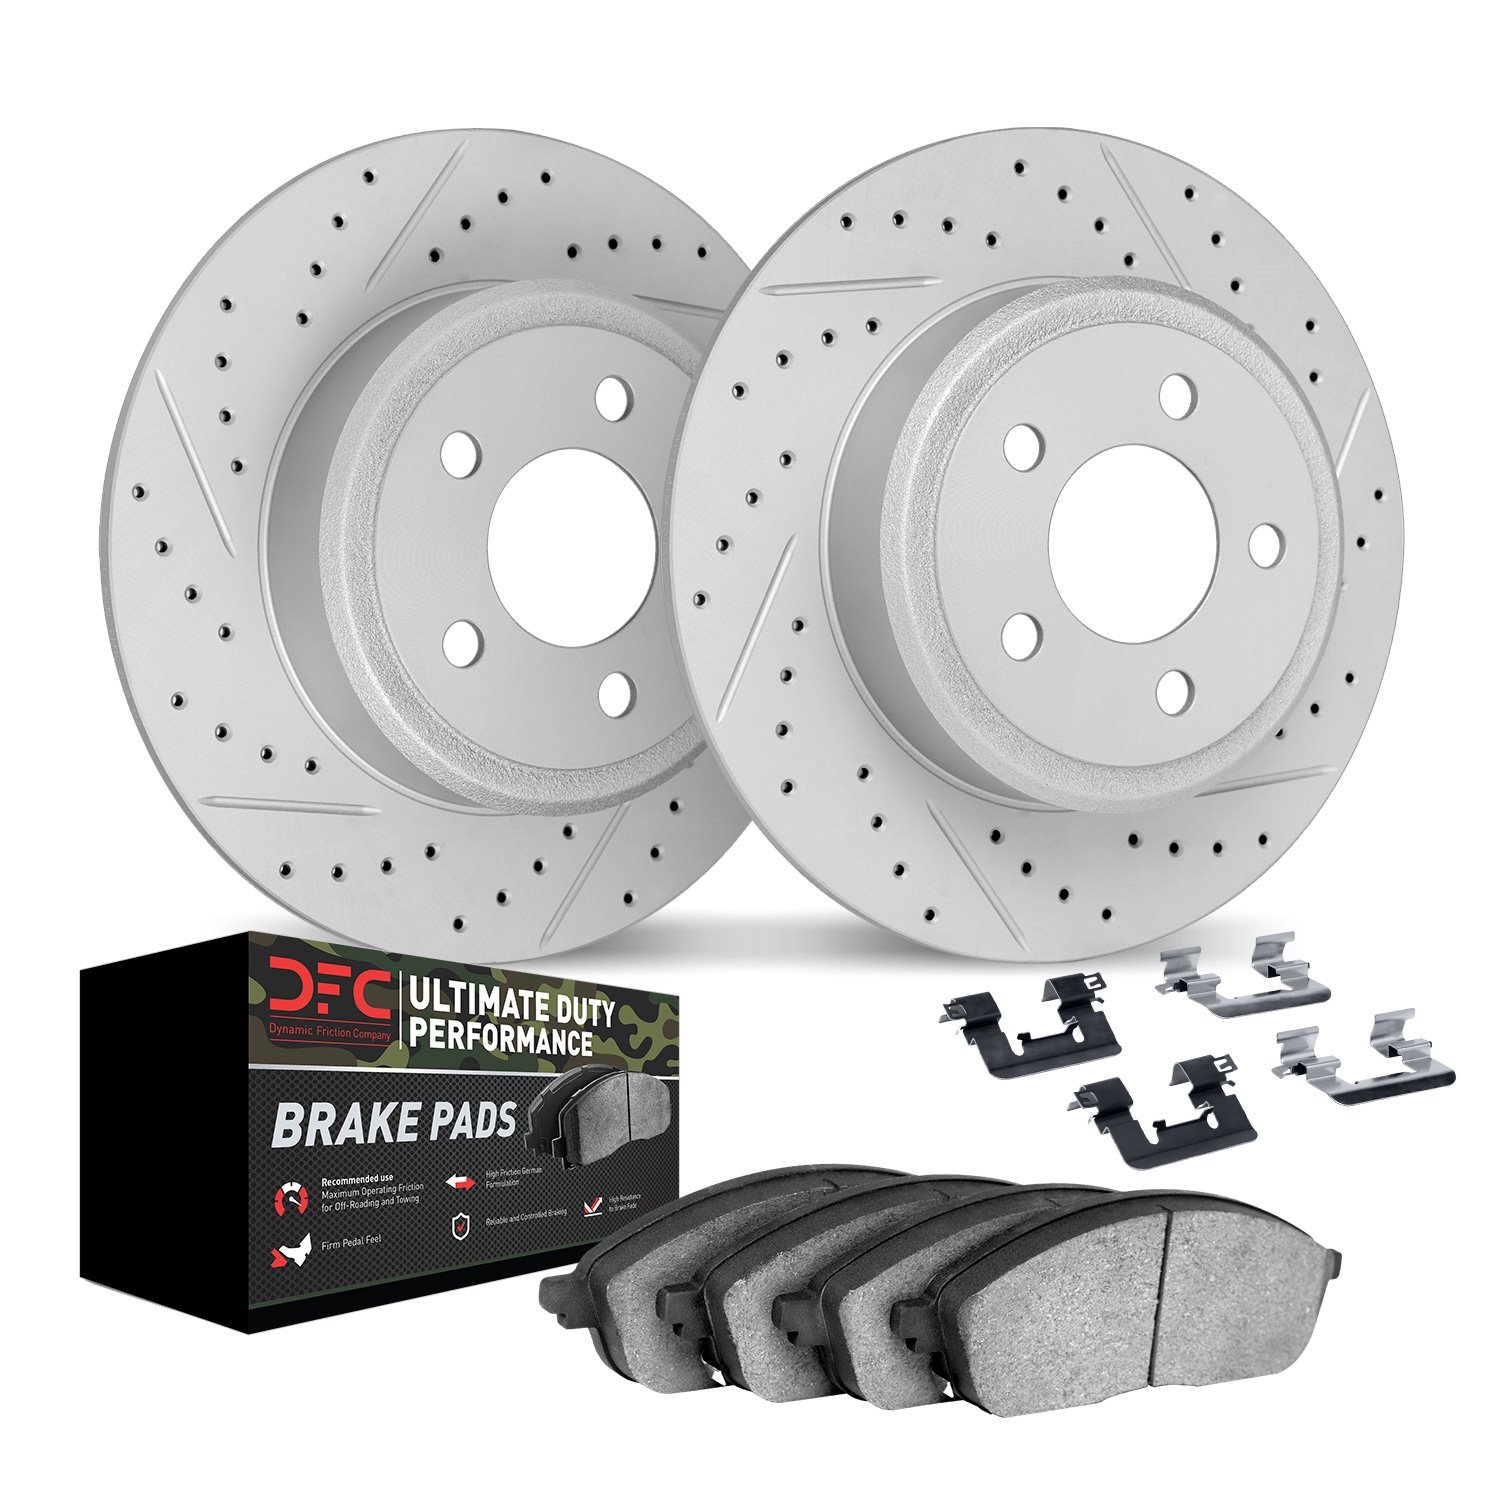 2412-54041 Geoperformance Drilled/Slotted Brake Rotors with Ultimate-Duty Brake Pads Kit & Hardware, 2006-2010 Ford/Lincoln/Merc